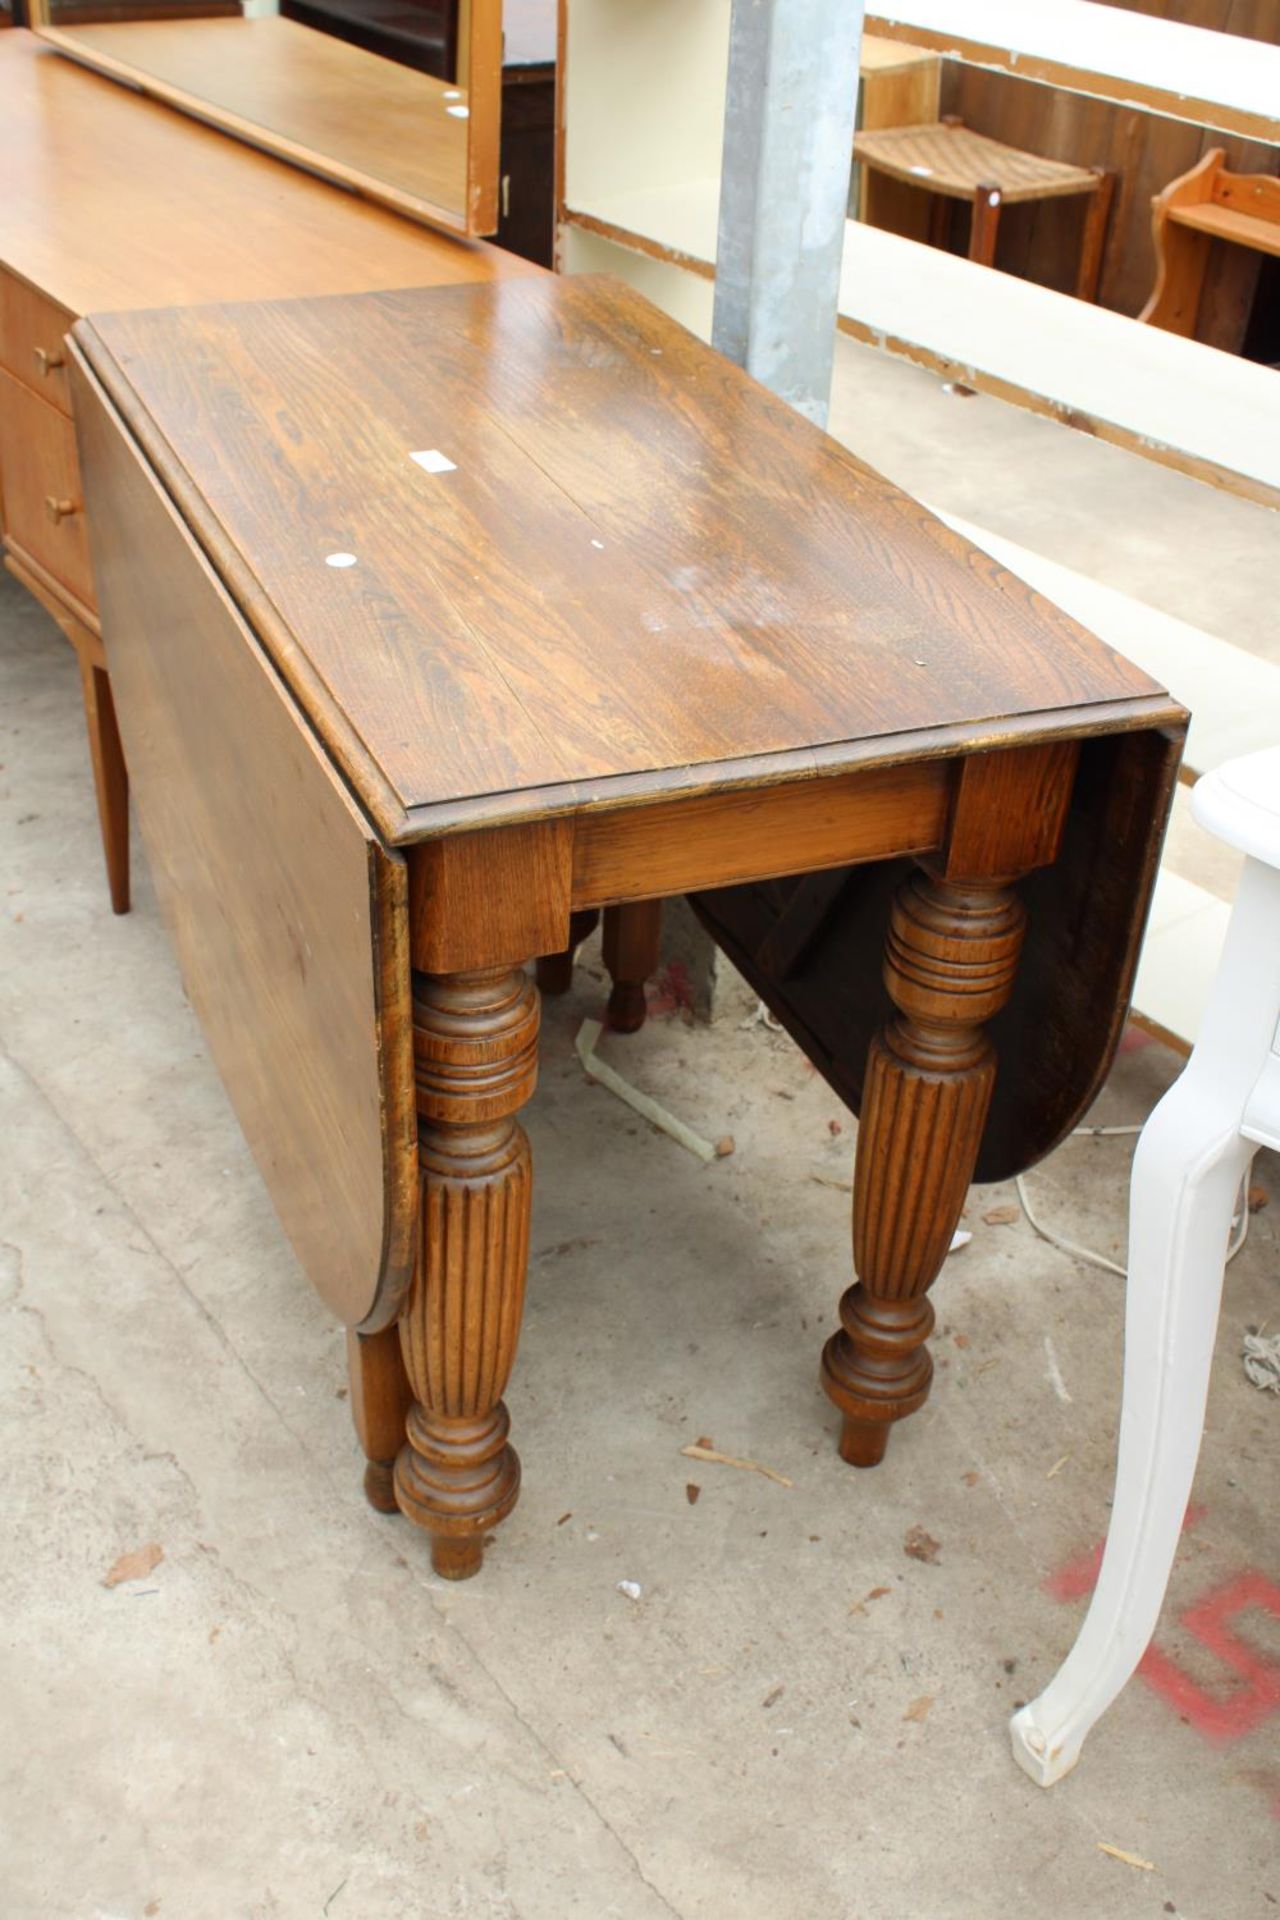 AN EARLY 20TH CENTURY OAK DROP-LEAF DINING TABLE ON TURNED AND FLUTED LEGS, 60" X 36" OPENED - Image 2 of 2